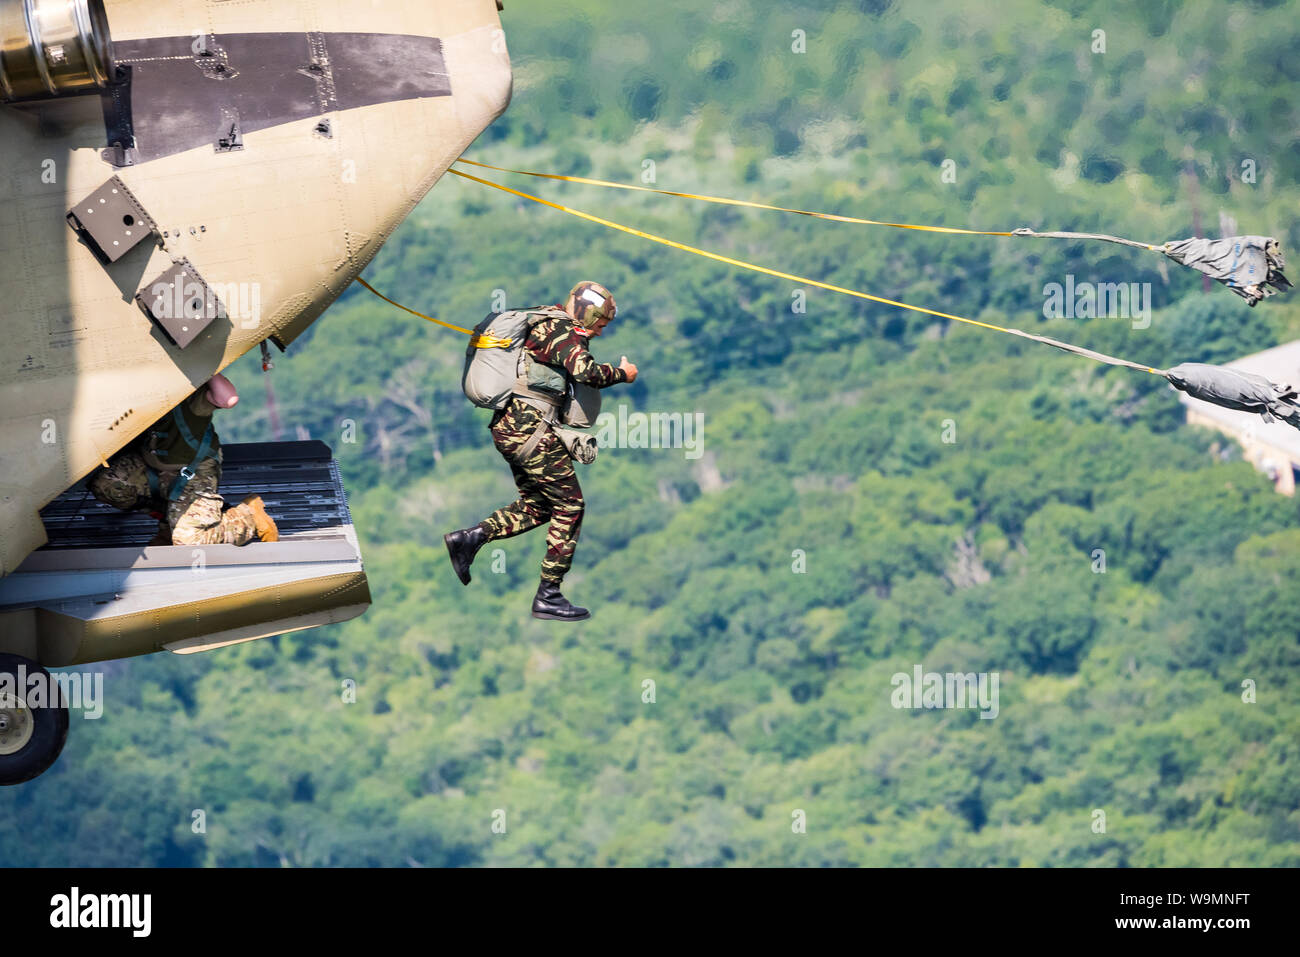 https://c8.alamy.com/comp/W9MNFT/soldier-jumping-out-of-a-chinook-at-2019-leapfest-an-international-static-line-parachute-training-event-and-competition-hosted-by-ri-natl-guard-W9MNFT.jpg